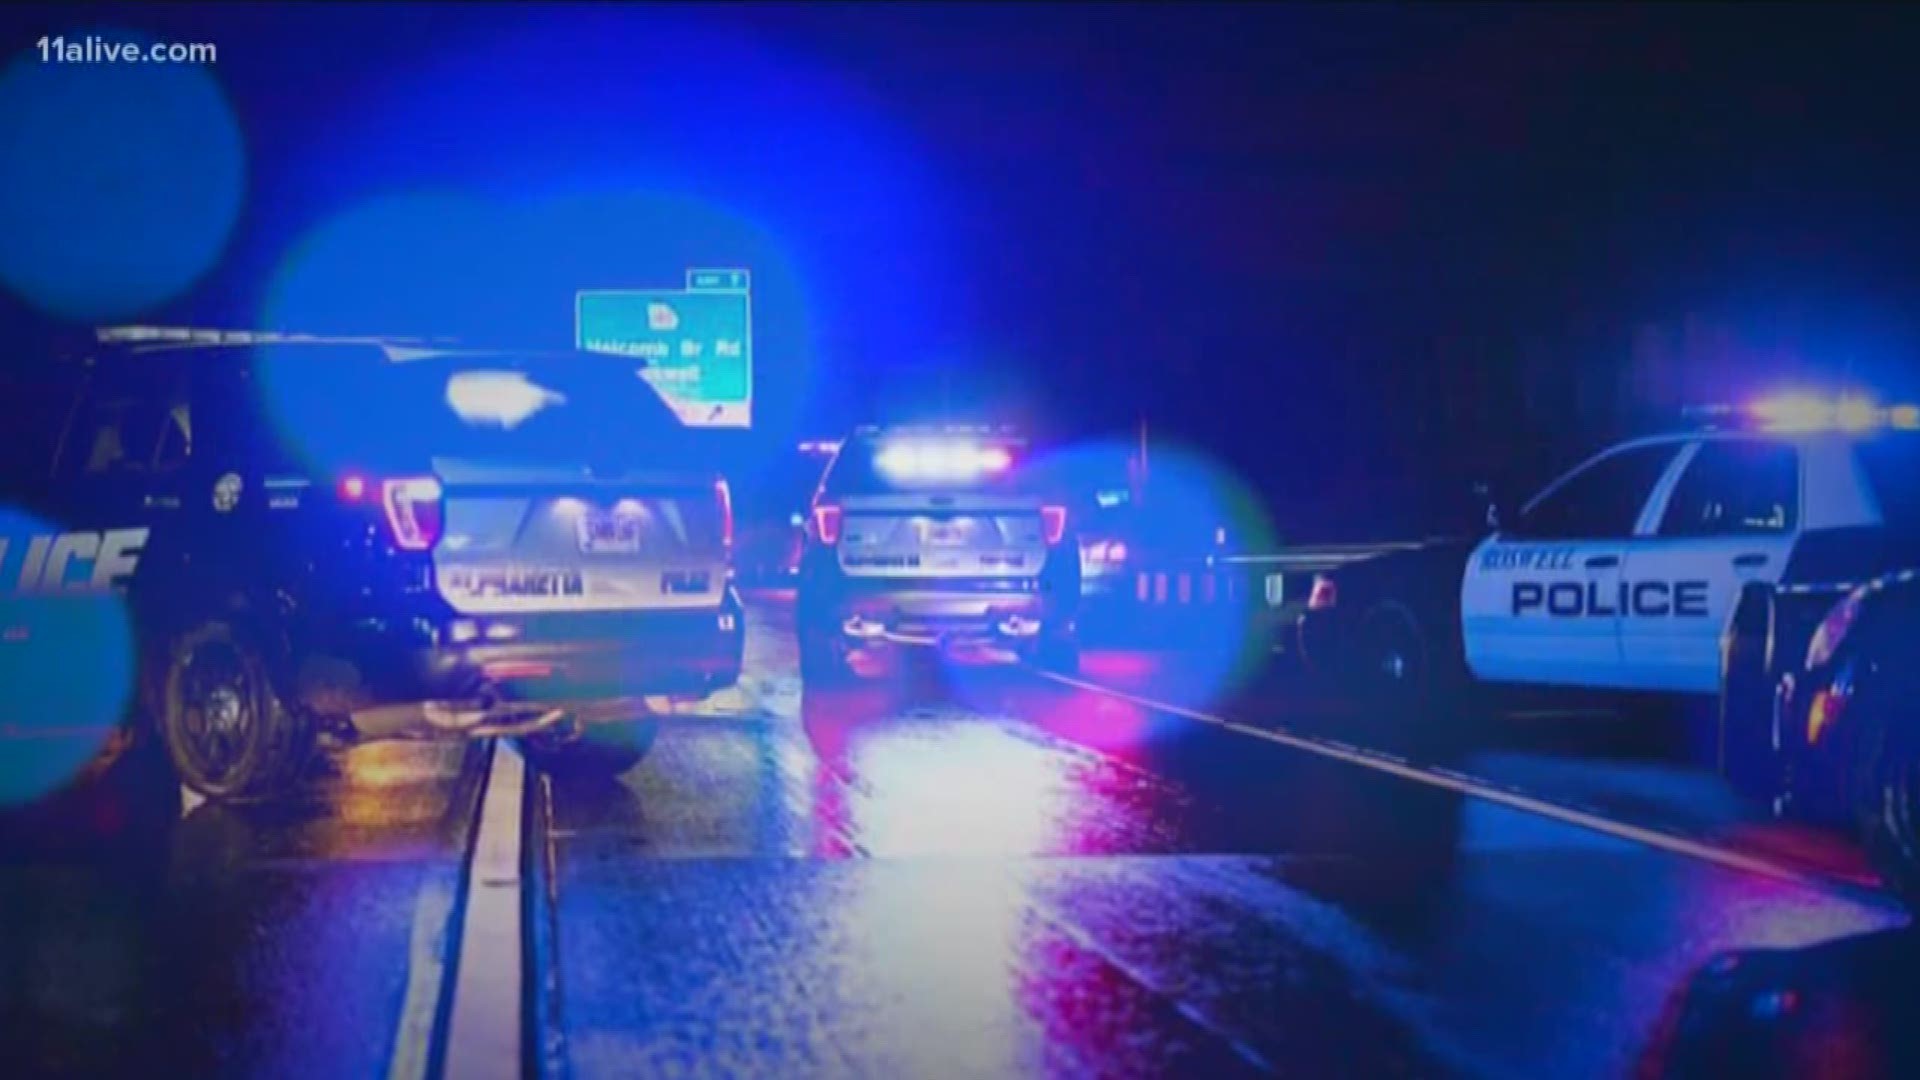 The car slammed into the rear of the Alpharetta police car at a speed of 85 mph, crushing the back end of the cruiser.